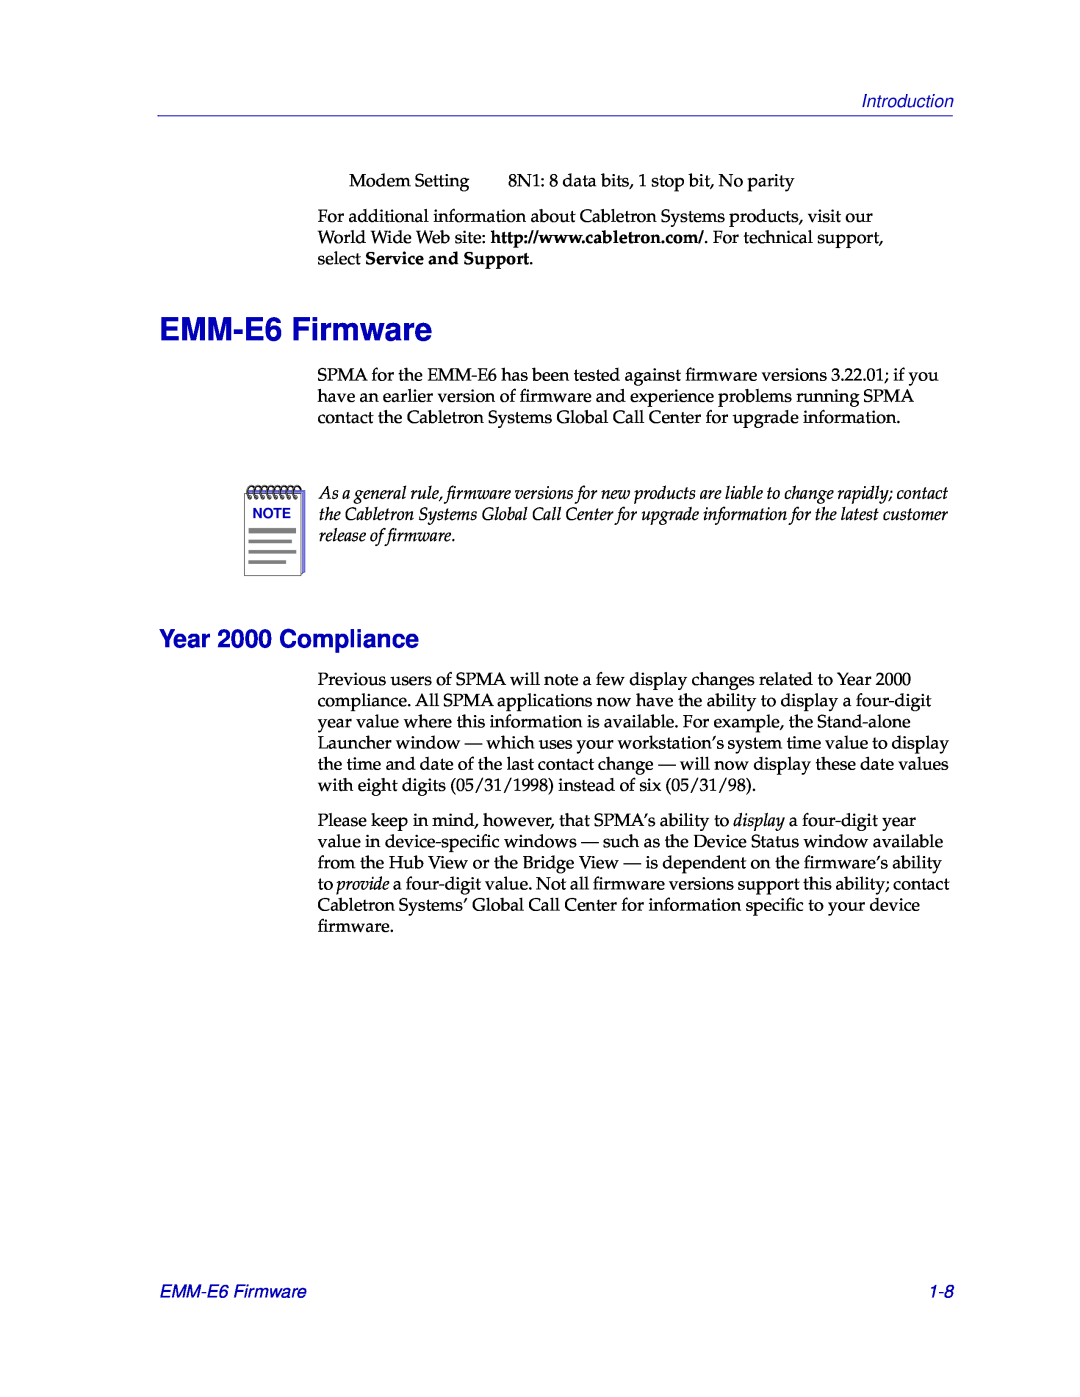 Cabletron Systems manual EMM-E6 Firmware, Year 2000 Compliance, Introduction 